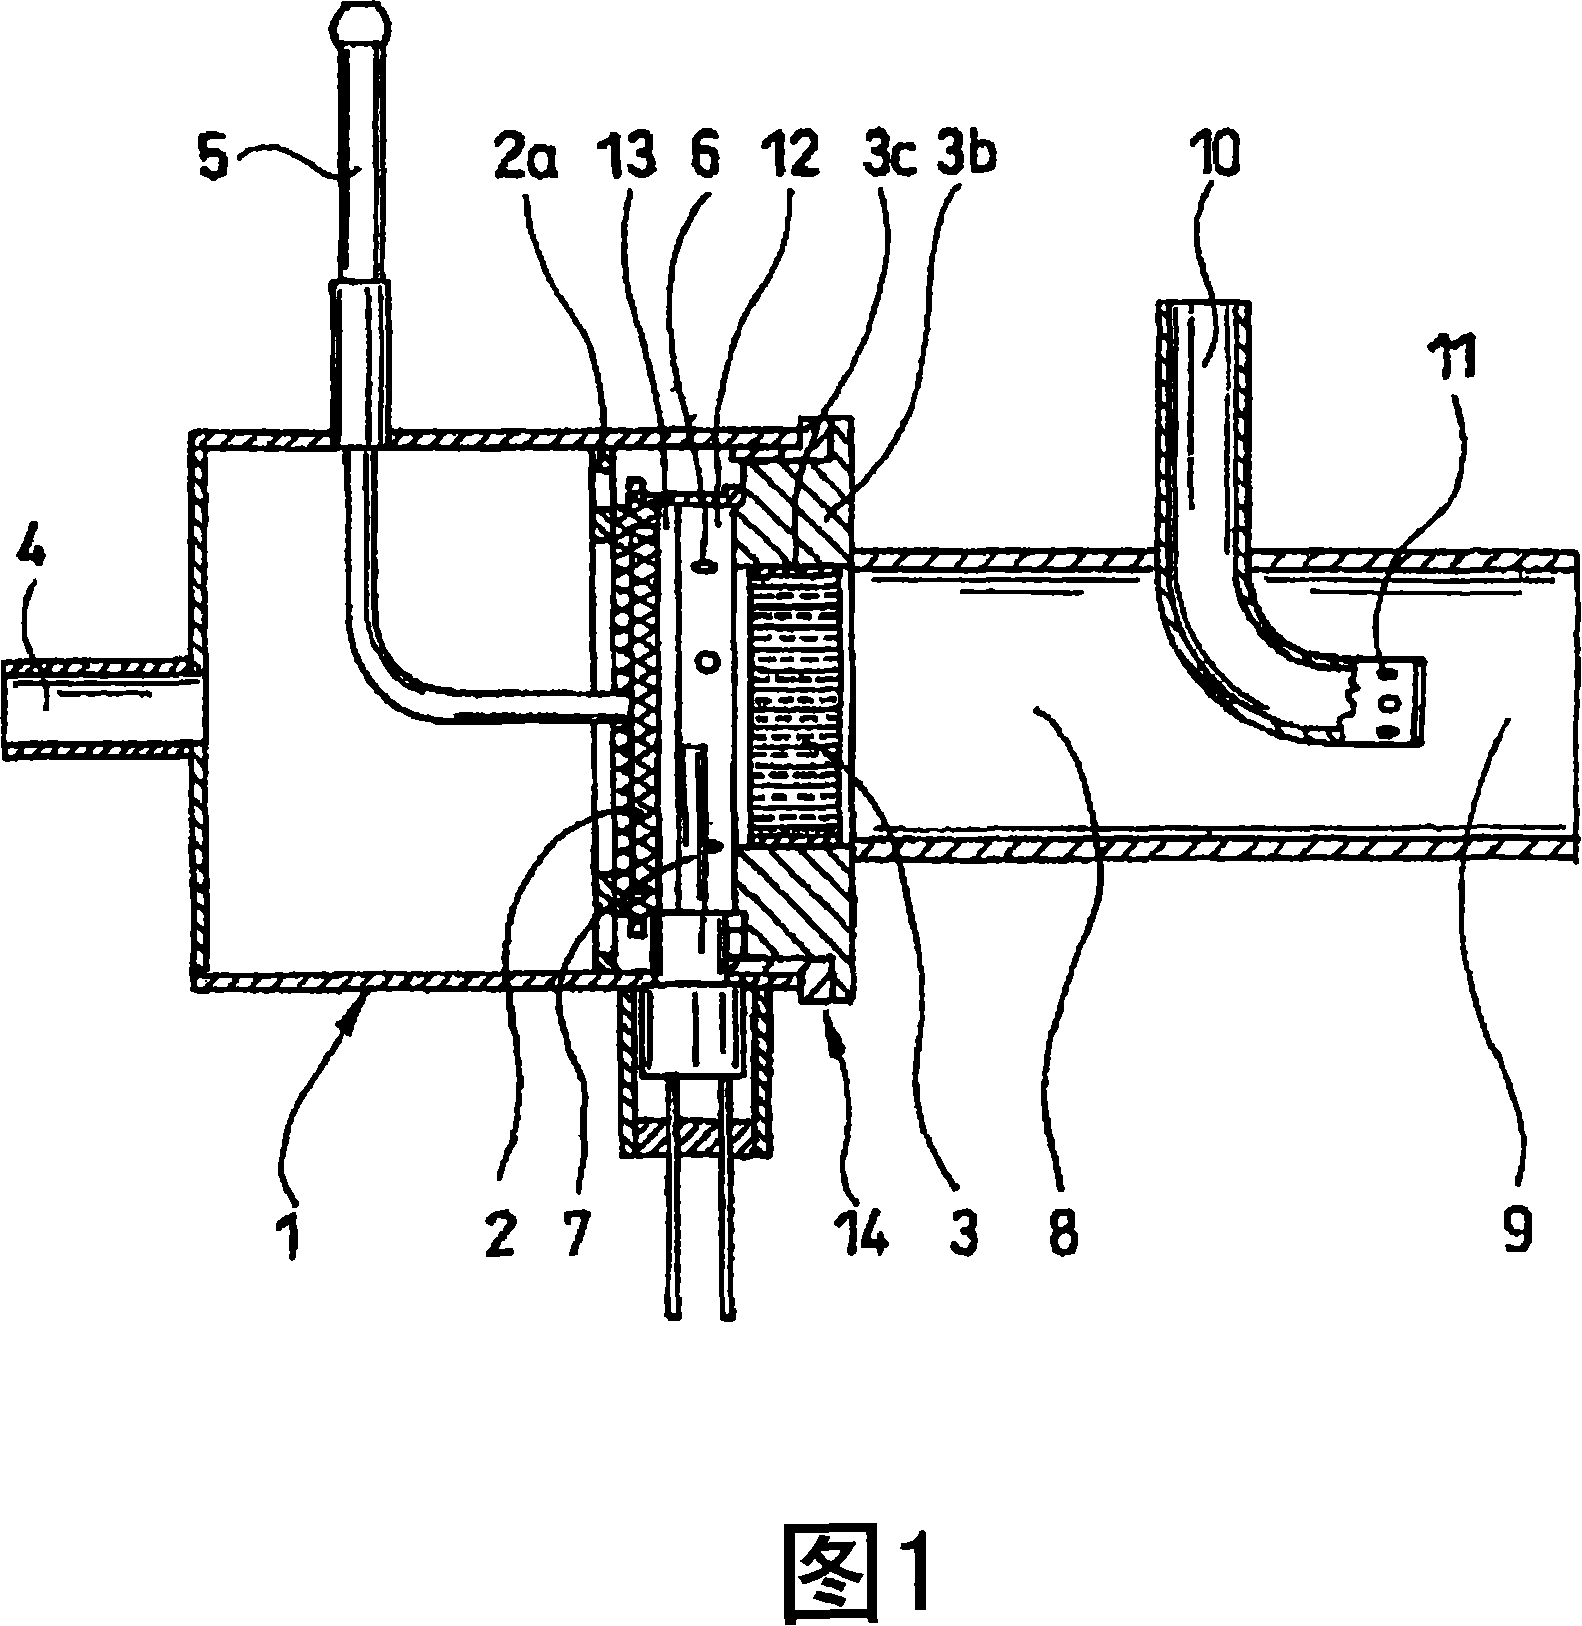 Device and method for preparing a homogeneous mixture consisting of fuel and oxidants